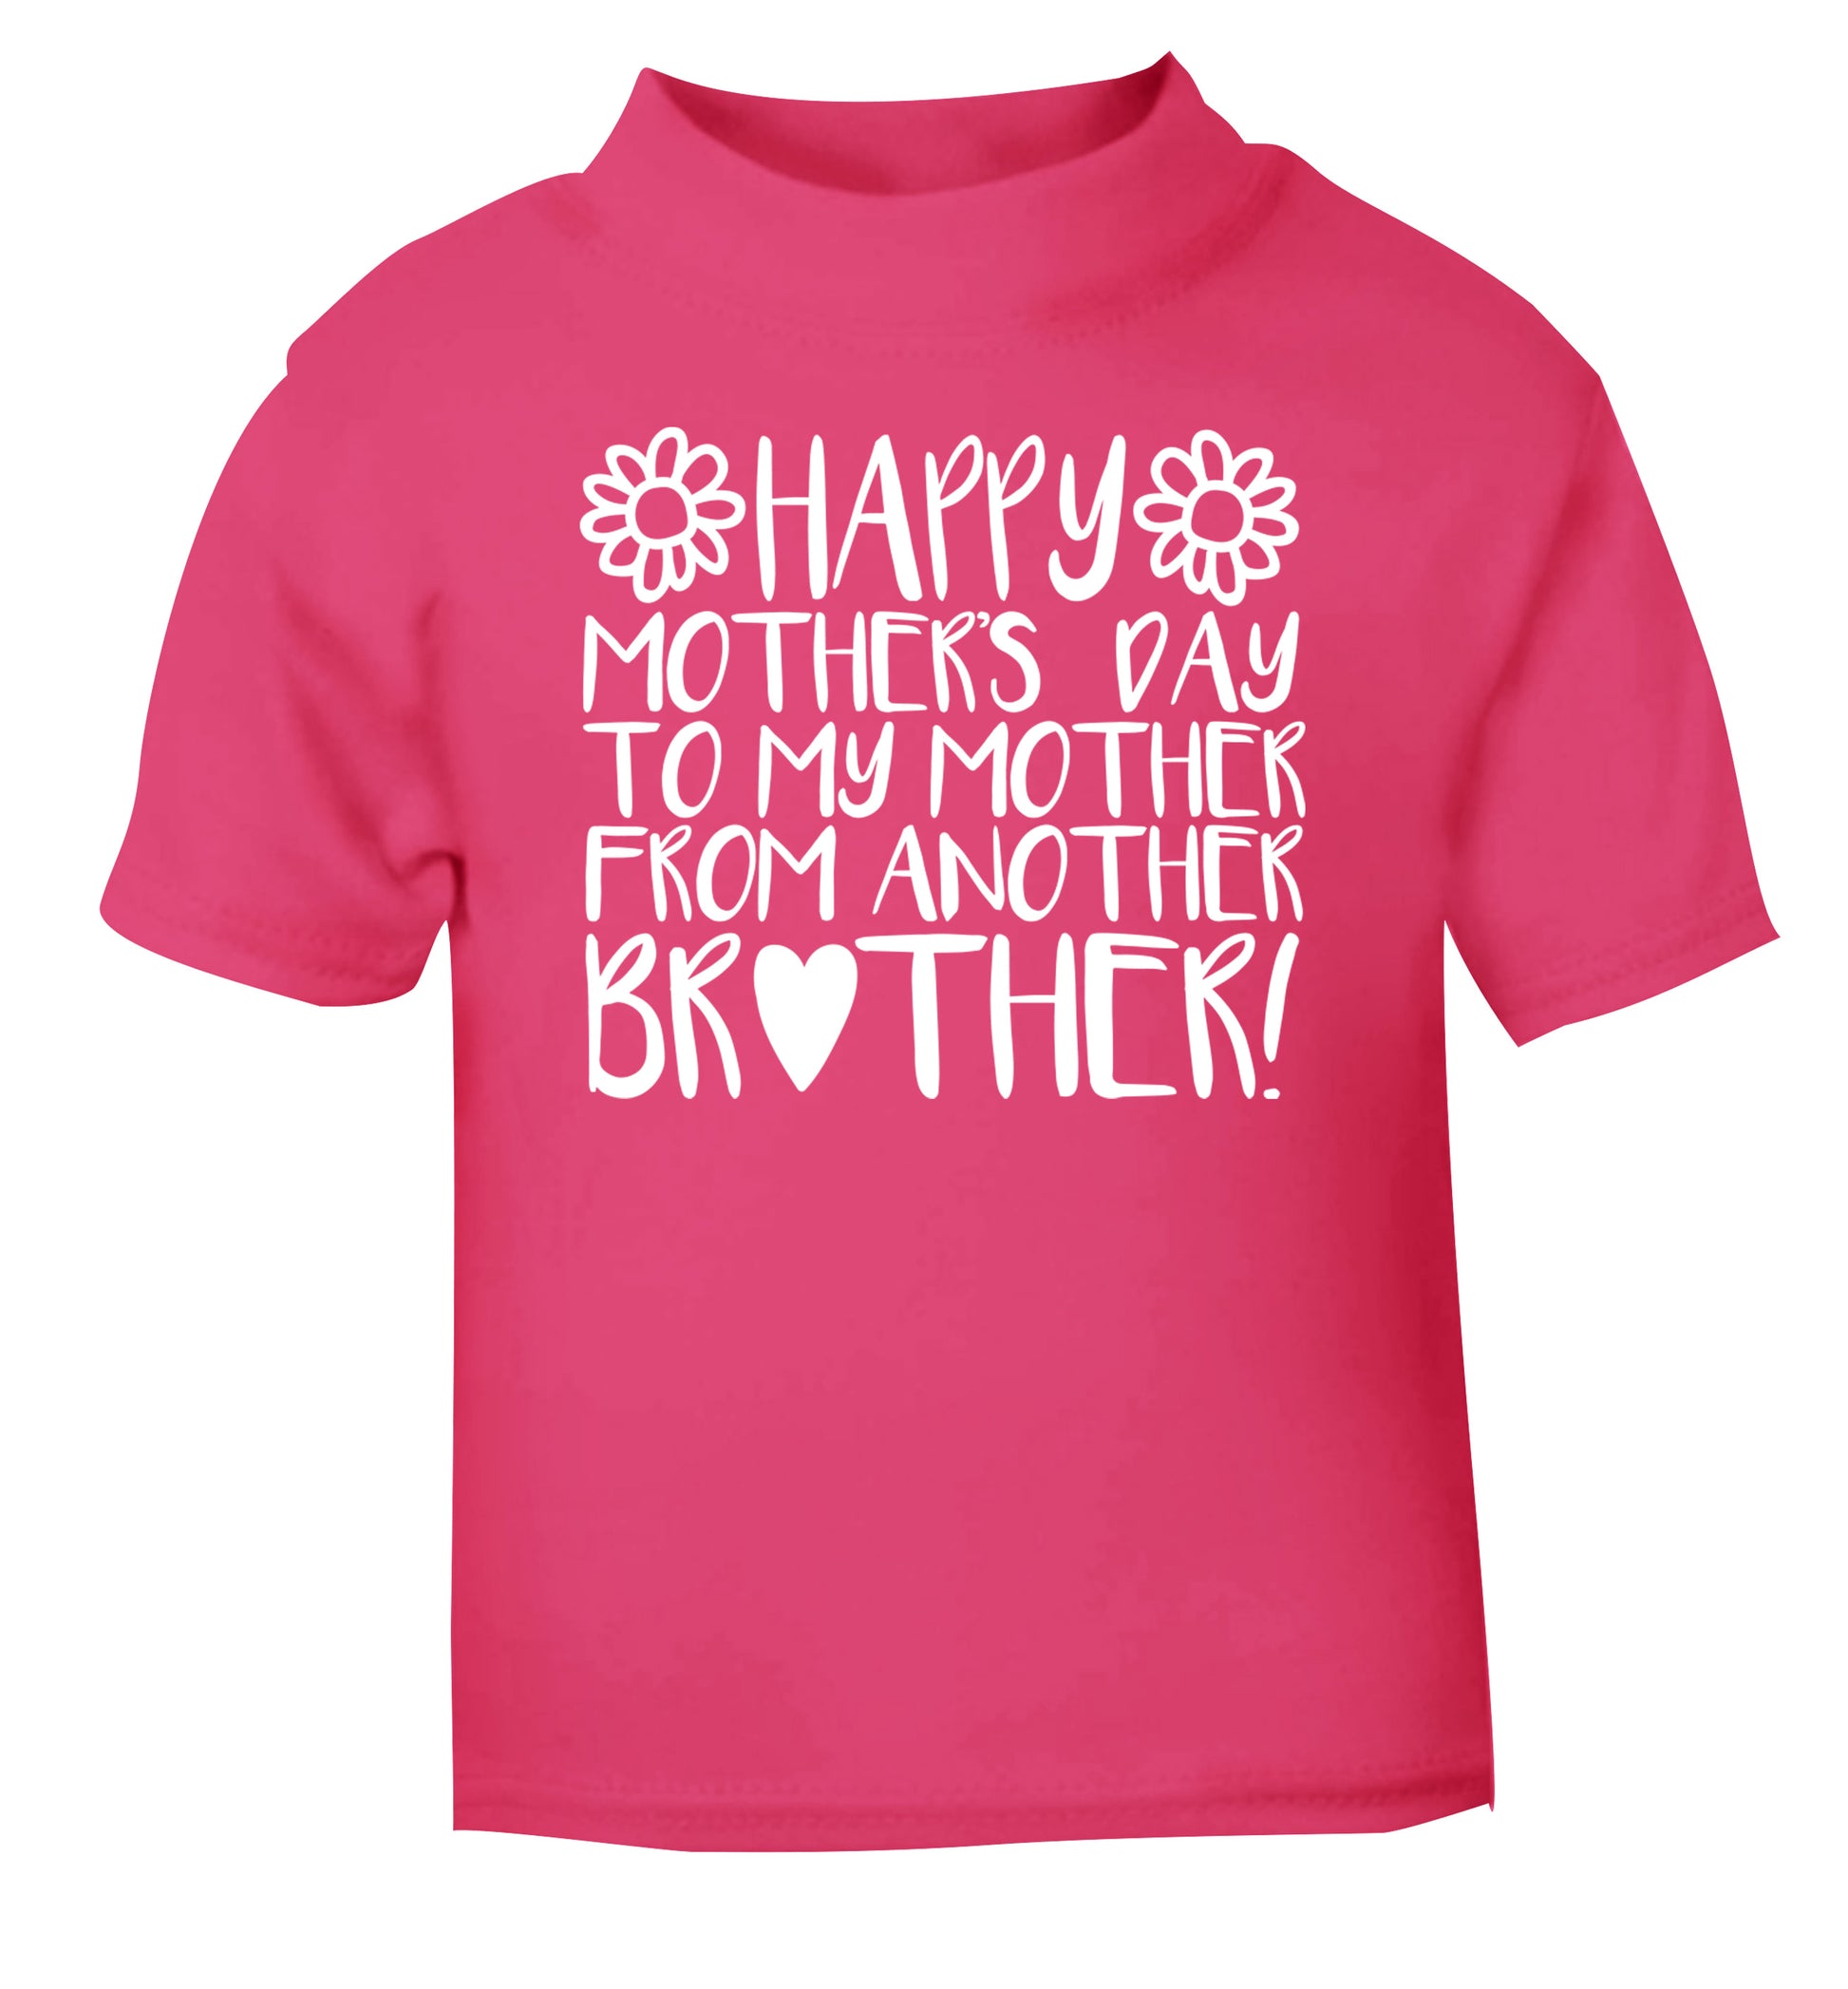 Happy mother's day to my mother from another brother pink Baby Toddler Tshirt 2 Years